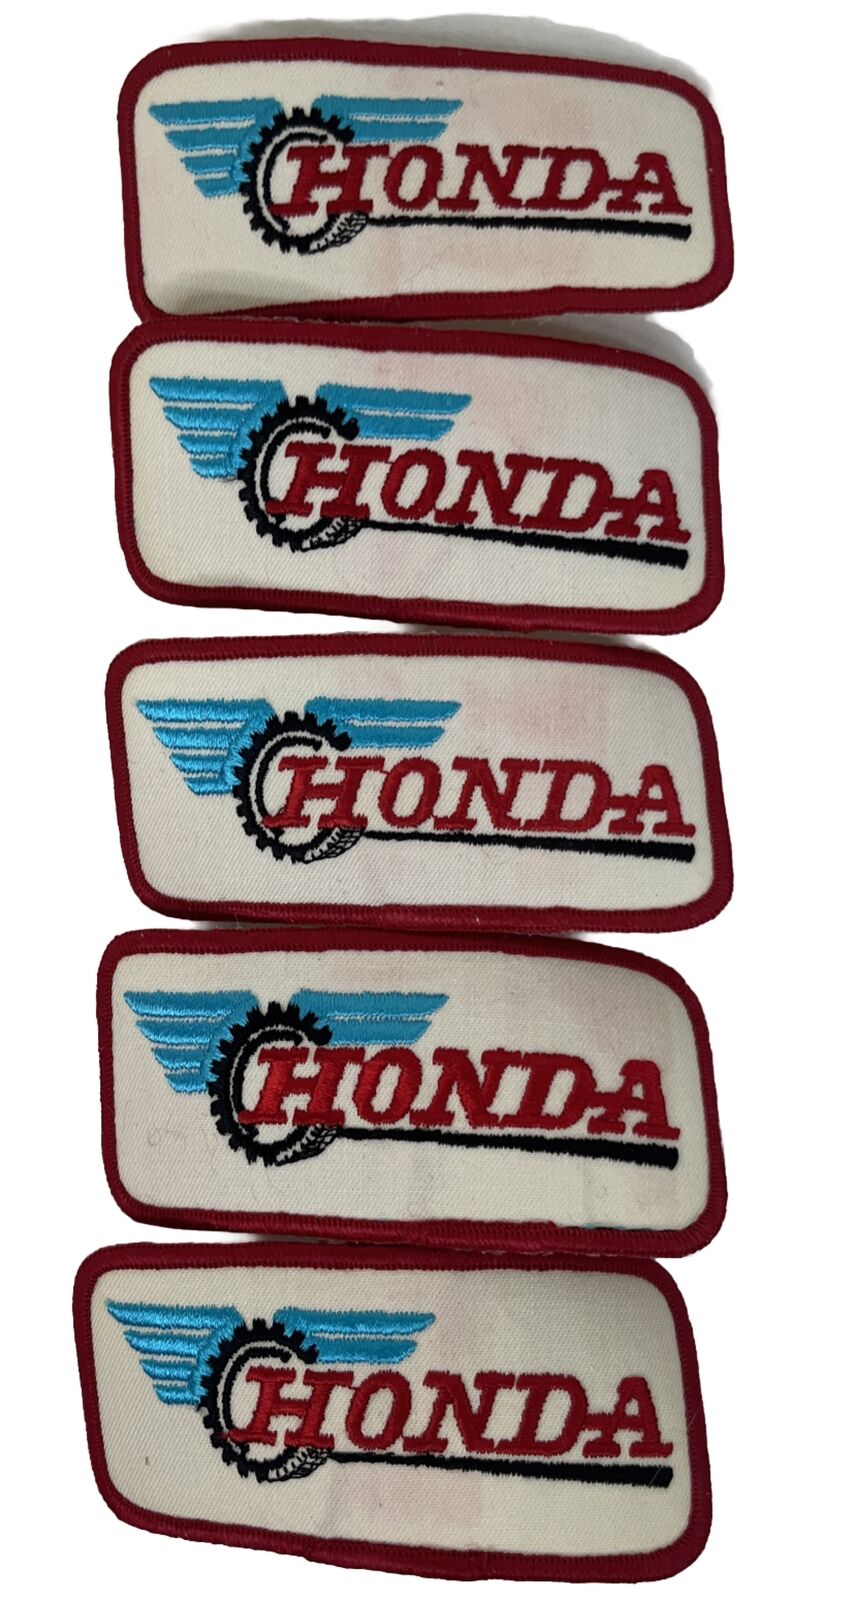 Vtg Honda Logo Racing Patch Decal Motocross Motorcycle Racing Stains Lot 5